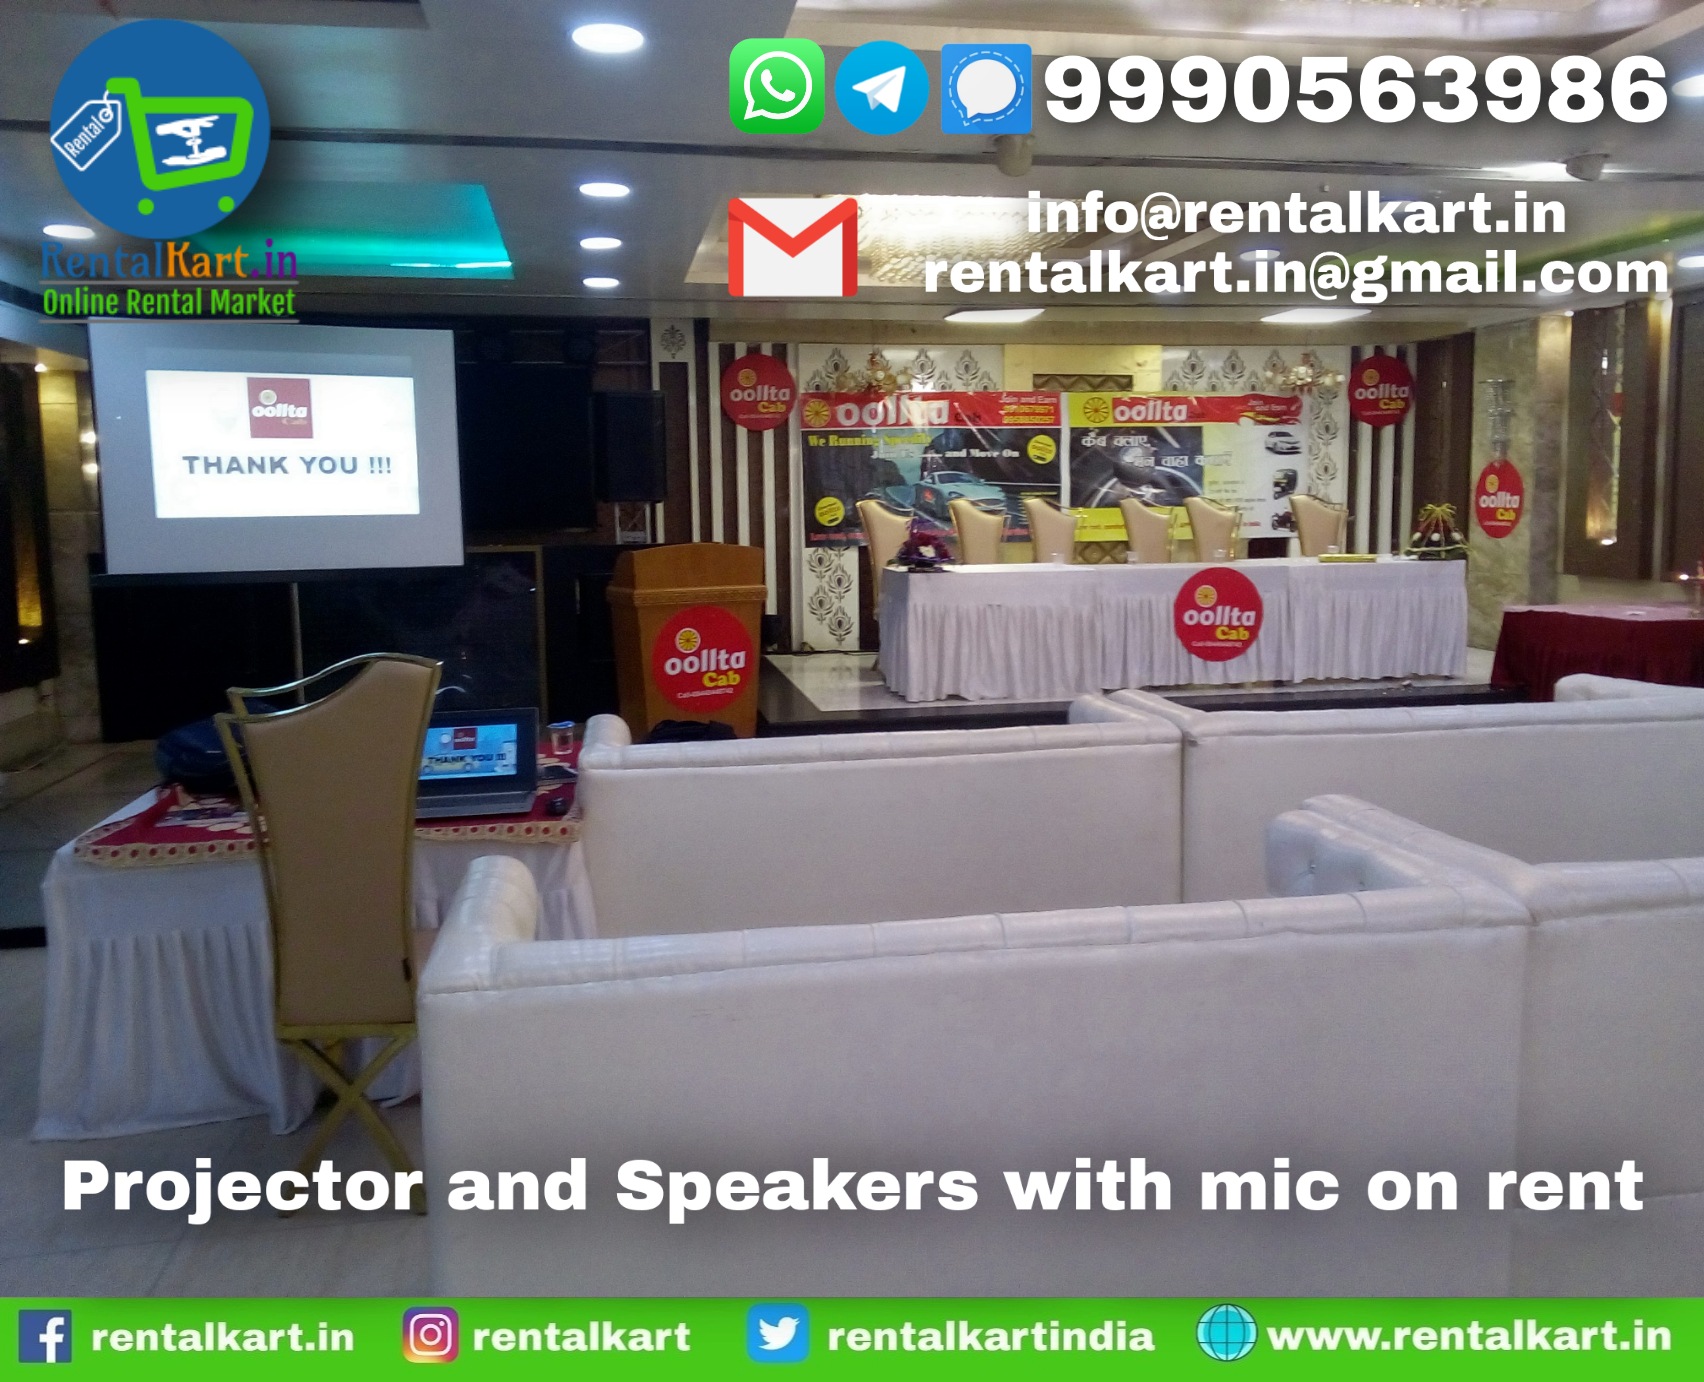 Projector and Speakers with mic on rent in Delhi and Delhi NCR